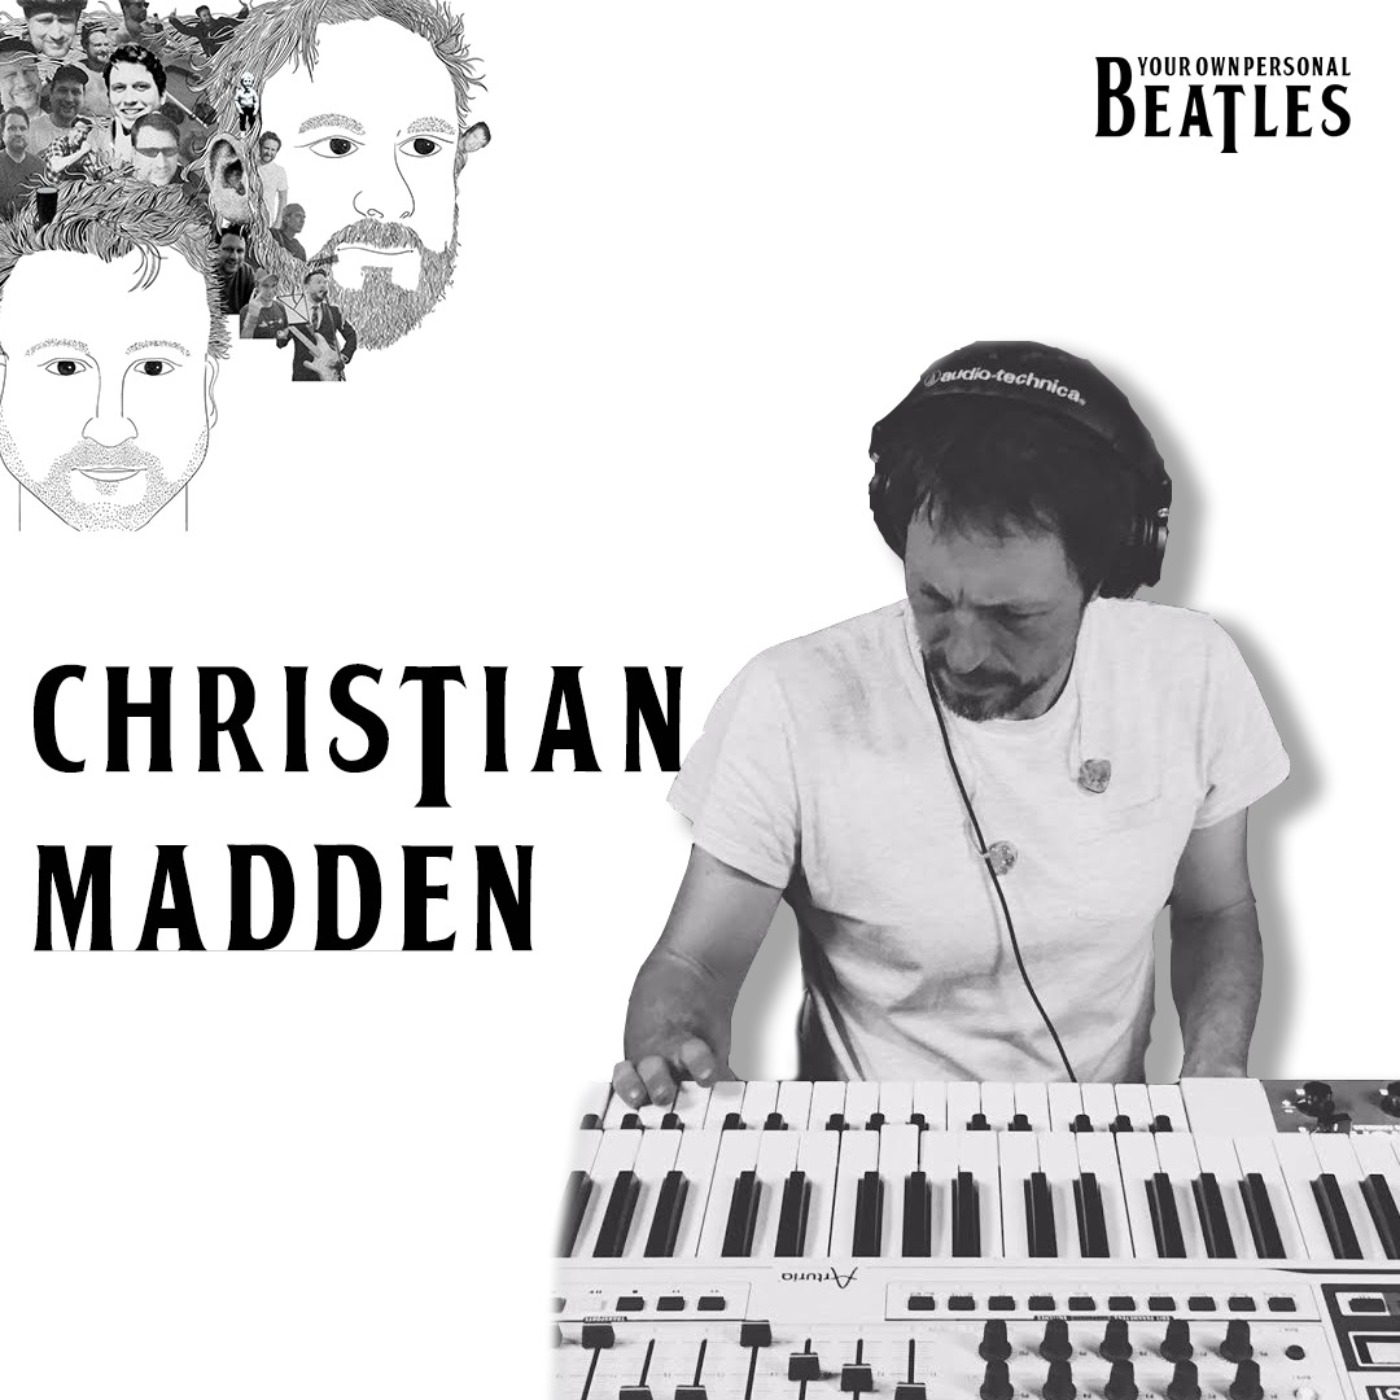 Christian Madden's Personal Beatles